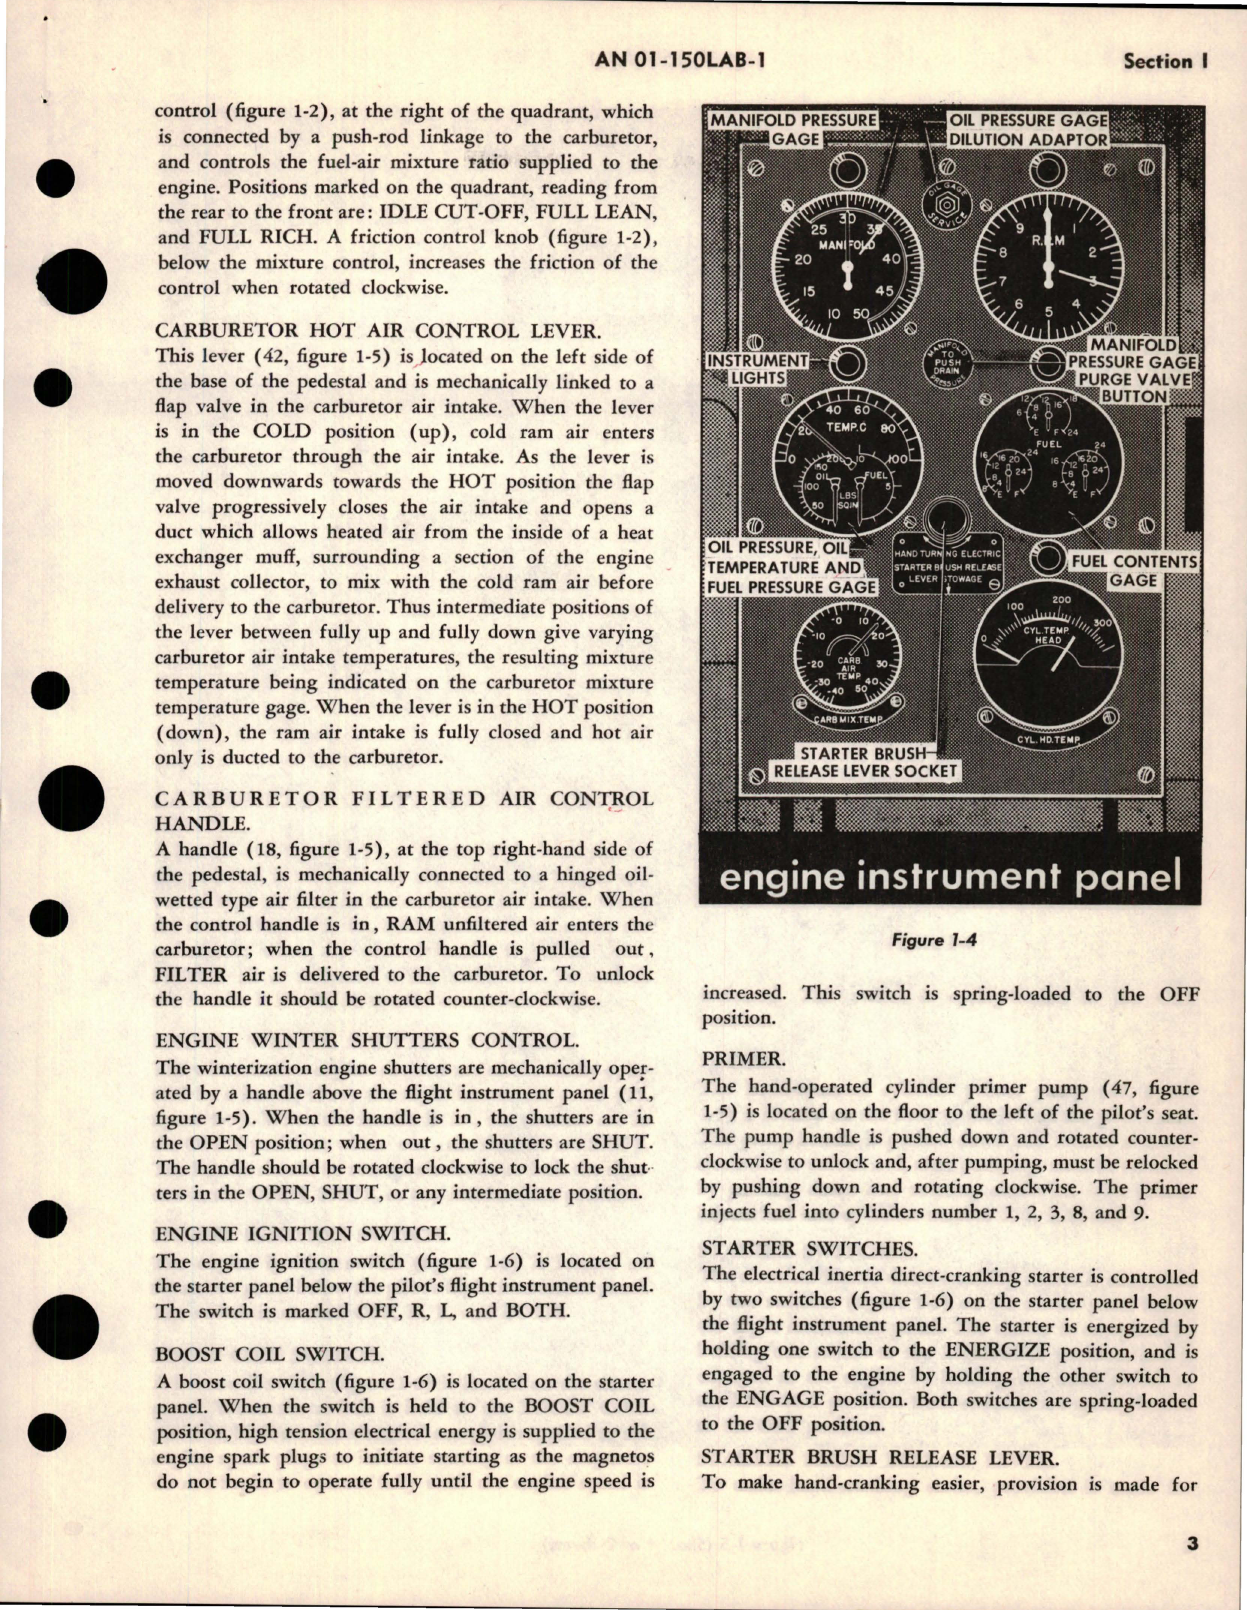 Sample page 9 from AirCorps Library document: Flight Handbook for L-20A